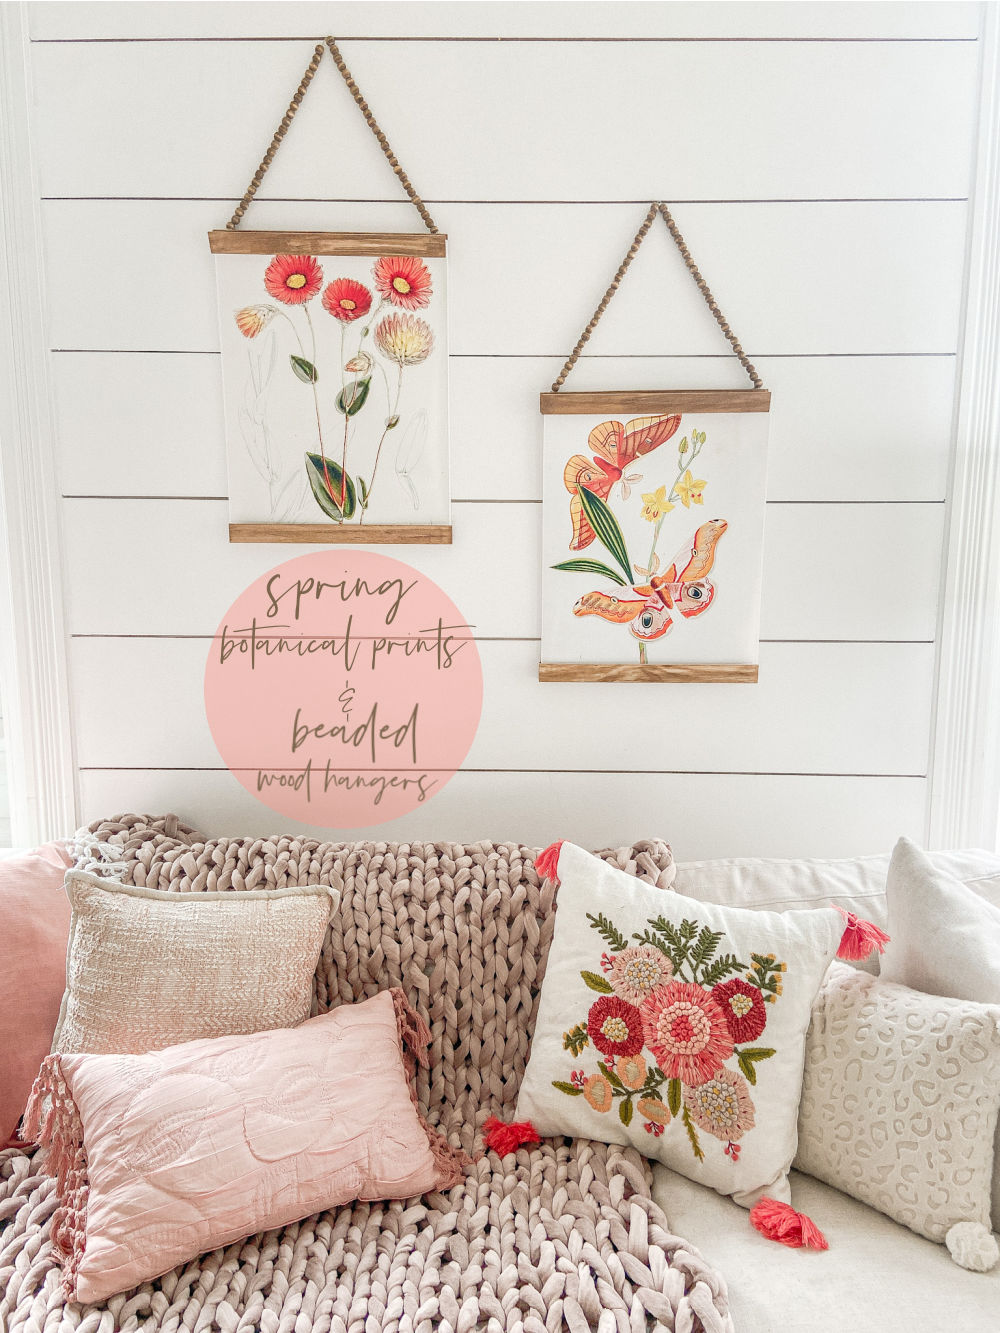 Spring Botanical Prints with DIY Beaded Hangers. Bring a little spring color into your home and make beaded hangers for less than $5!